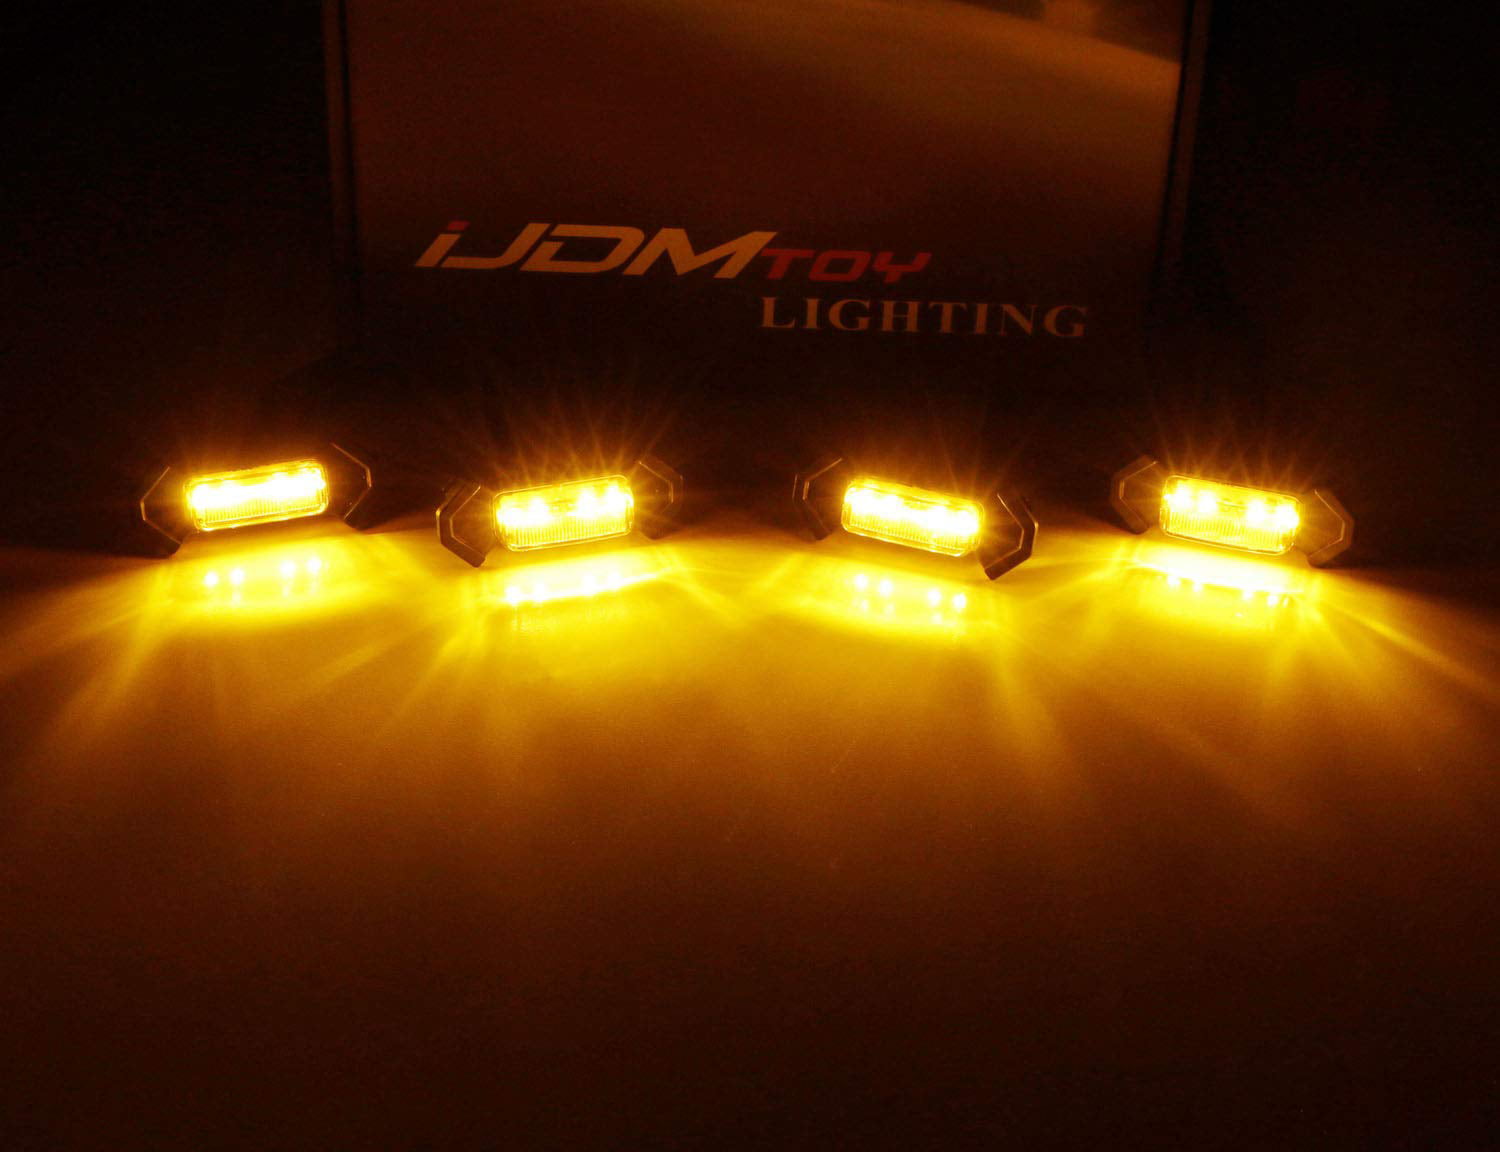 4-SMD 6000K White LED Light Assy & Wiring Harness 4 Includes iJDMTOY 4pc Set Smoked Lens Front Grille Lighting Kit Compatible With 2016-up Toyota Tacoma w/TRD Pro Grill ONLY 